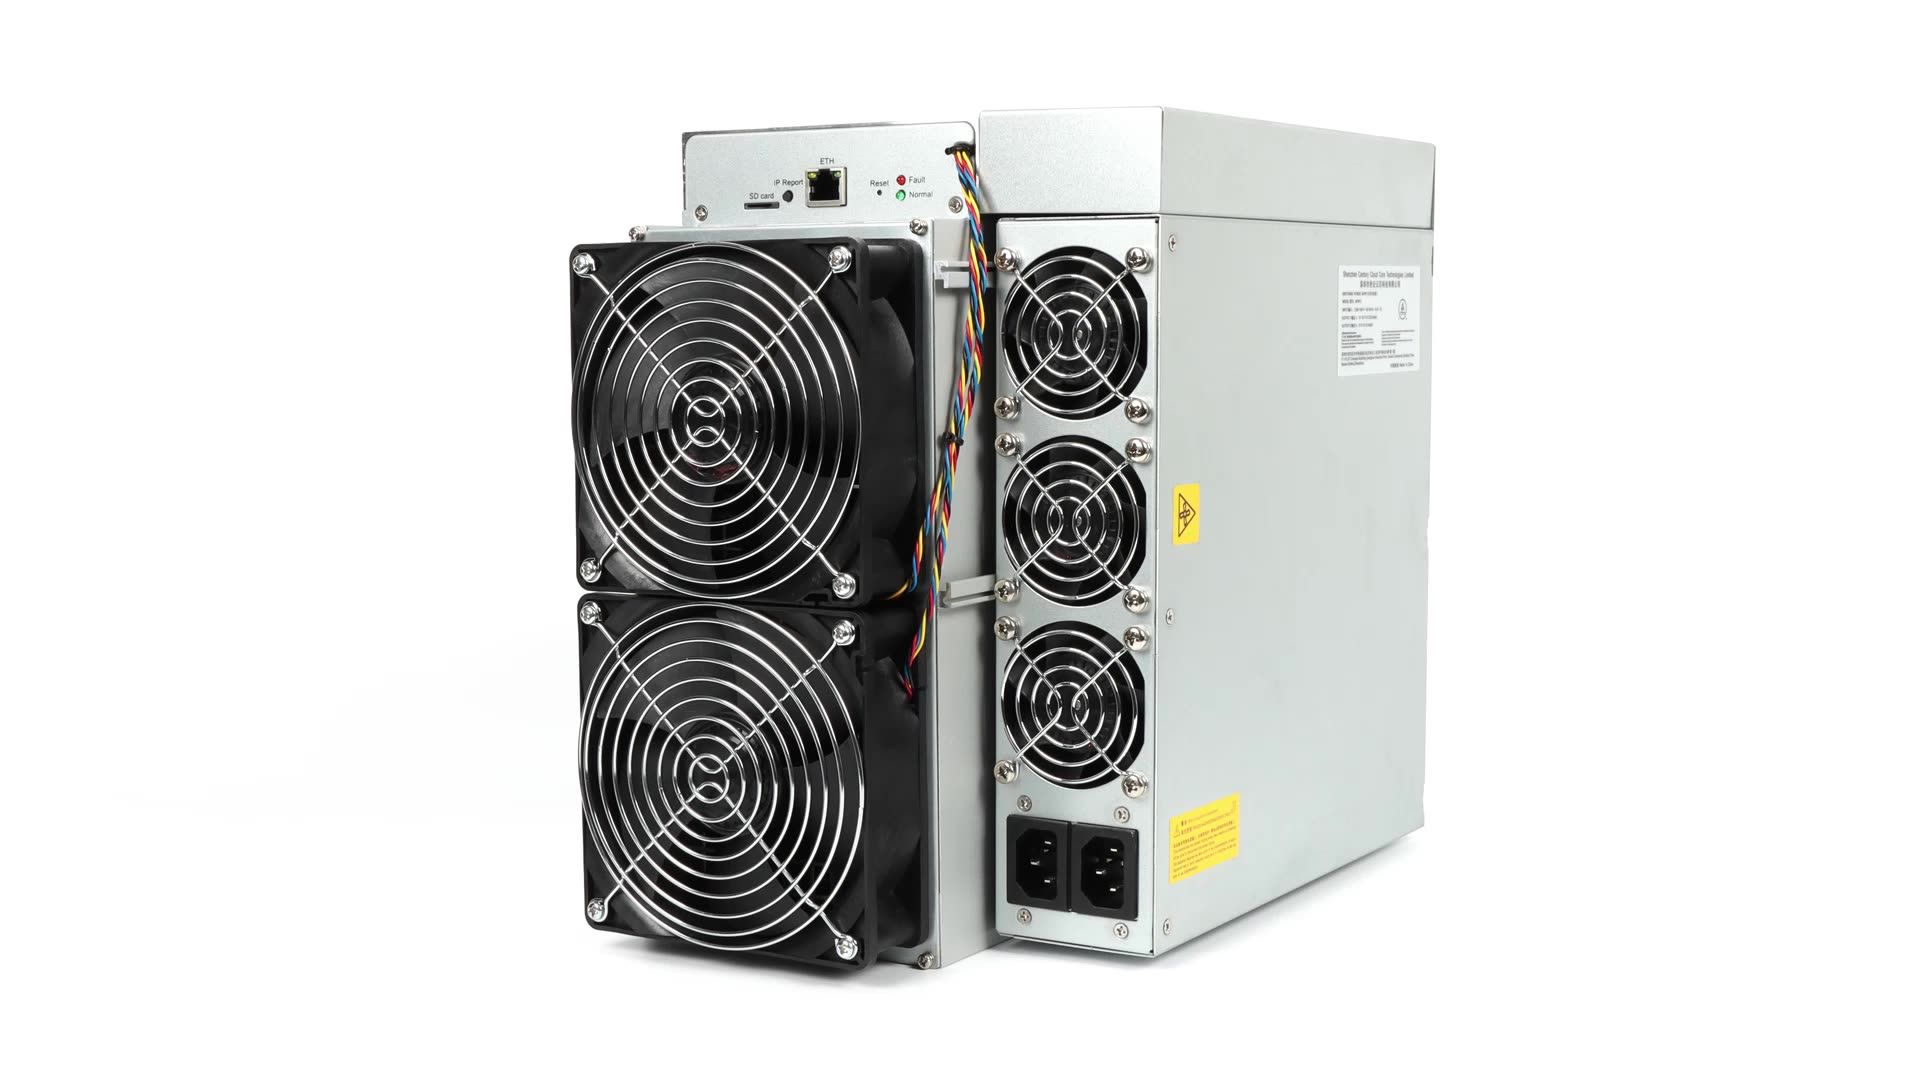 Antminer s21 hydro 335 th s. Antminer s19 Pro 110t. Bitmain s19 Pro 110. Bitmain Antminer s19j Pro. S19j Pro 100th Antminer.